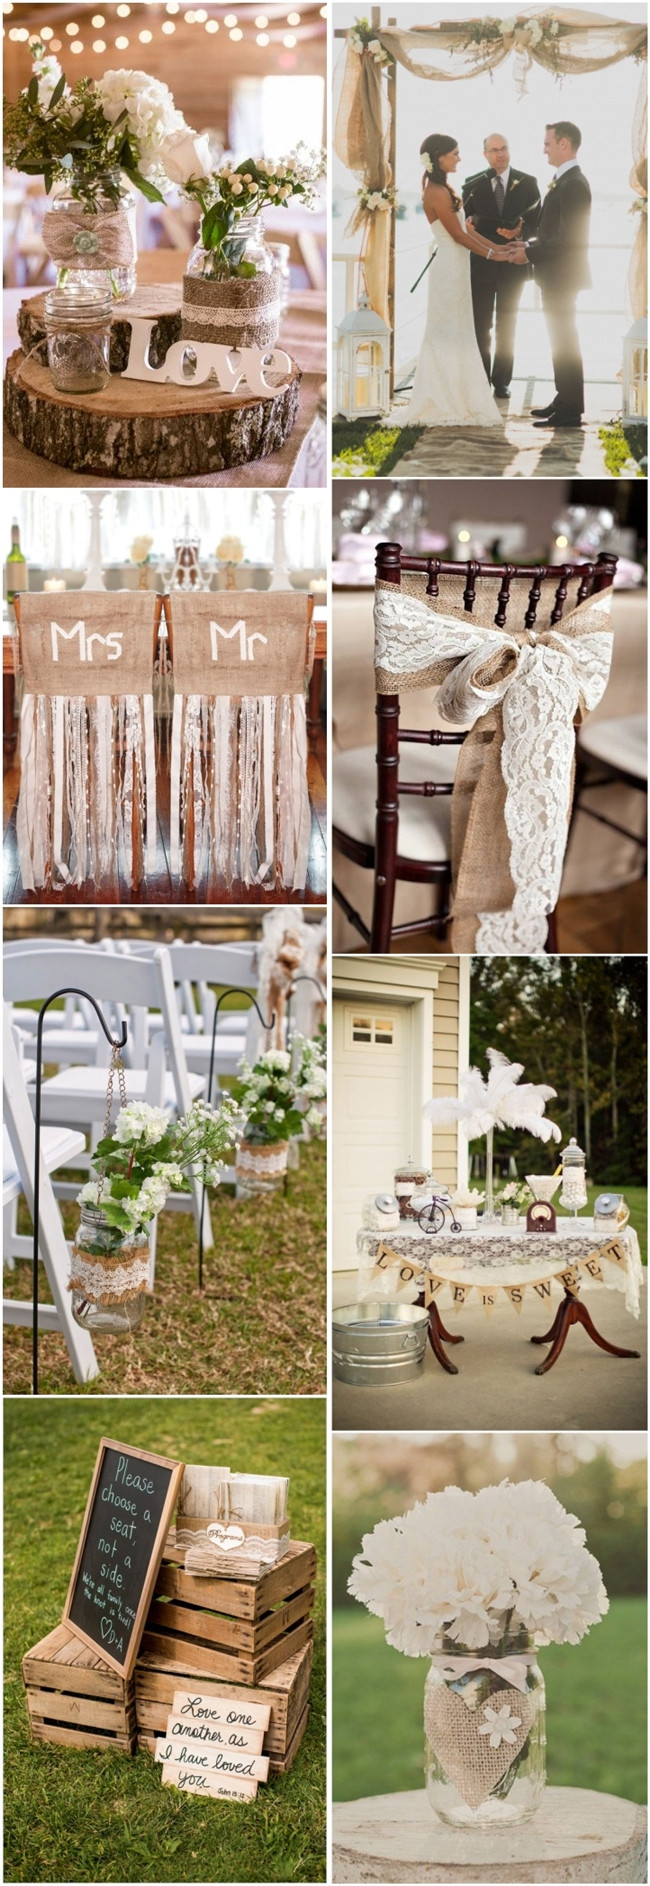 Country Theme Wedding
 45 Chic Rustic Burlap & Lace Wedding Ideas and Inspiration